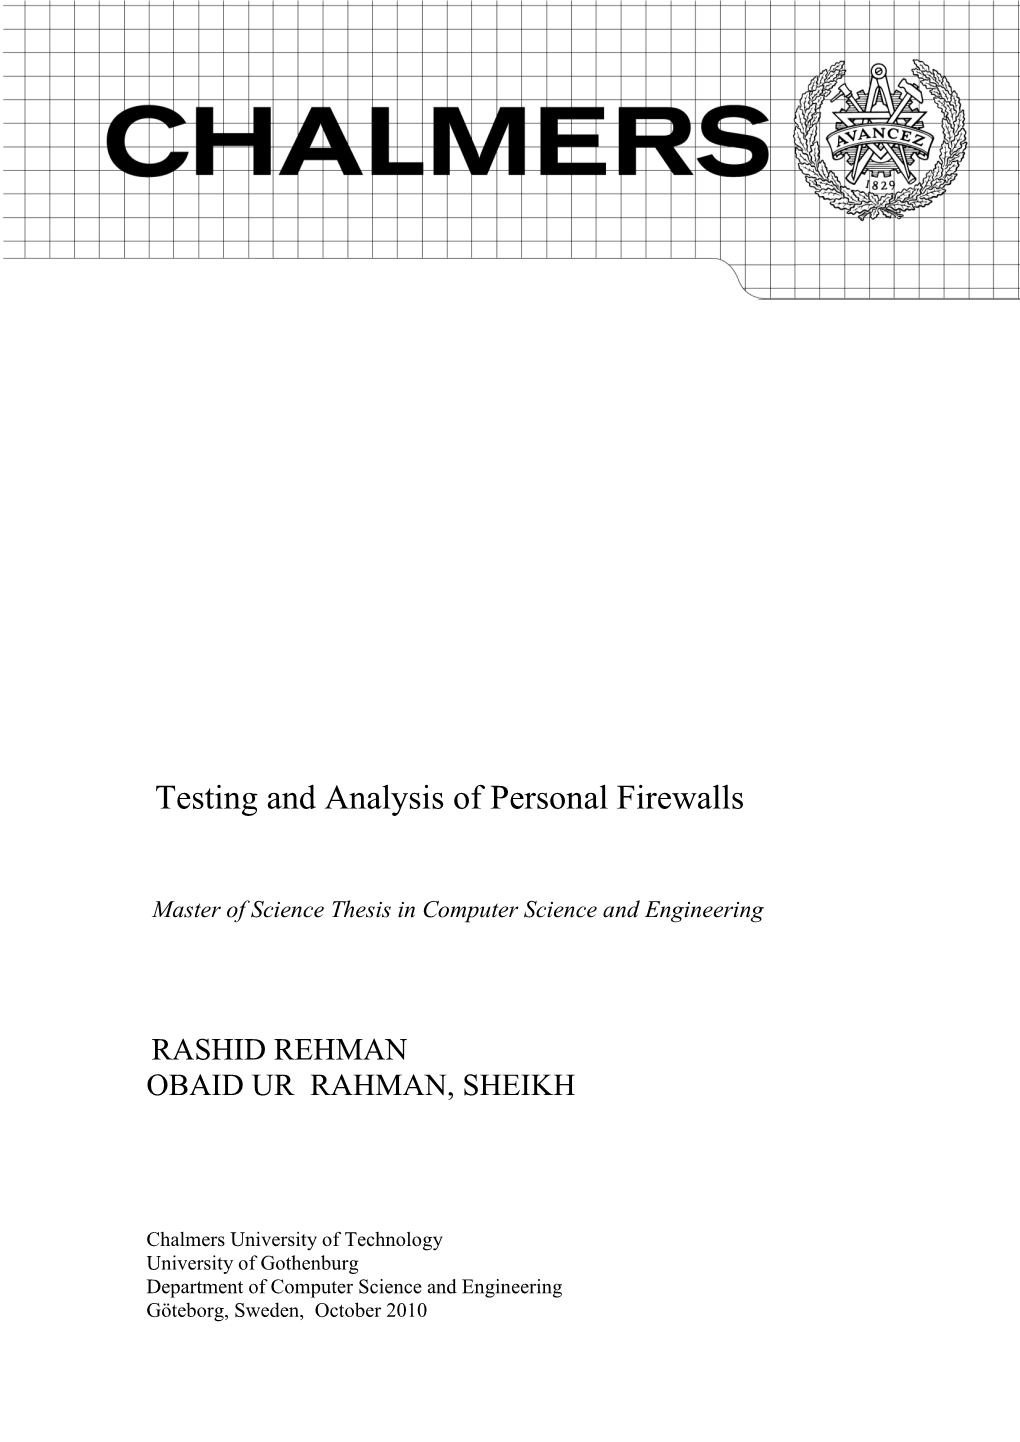 Testing and Analysis of Personal Firewalls